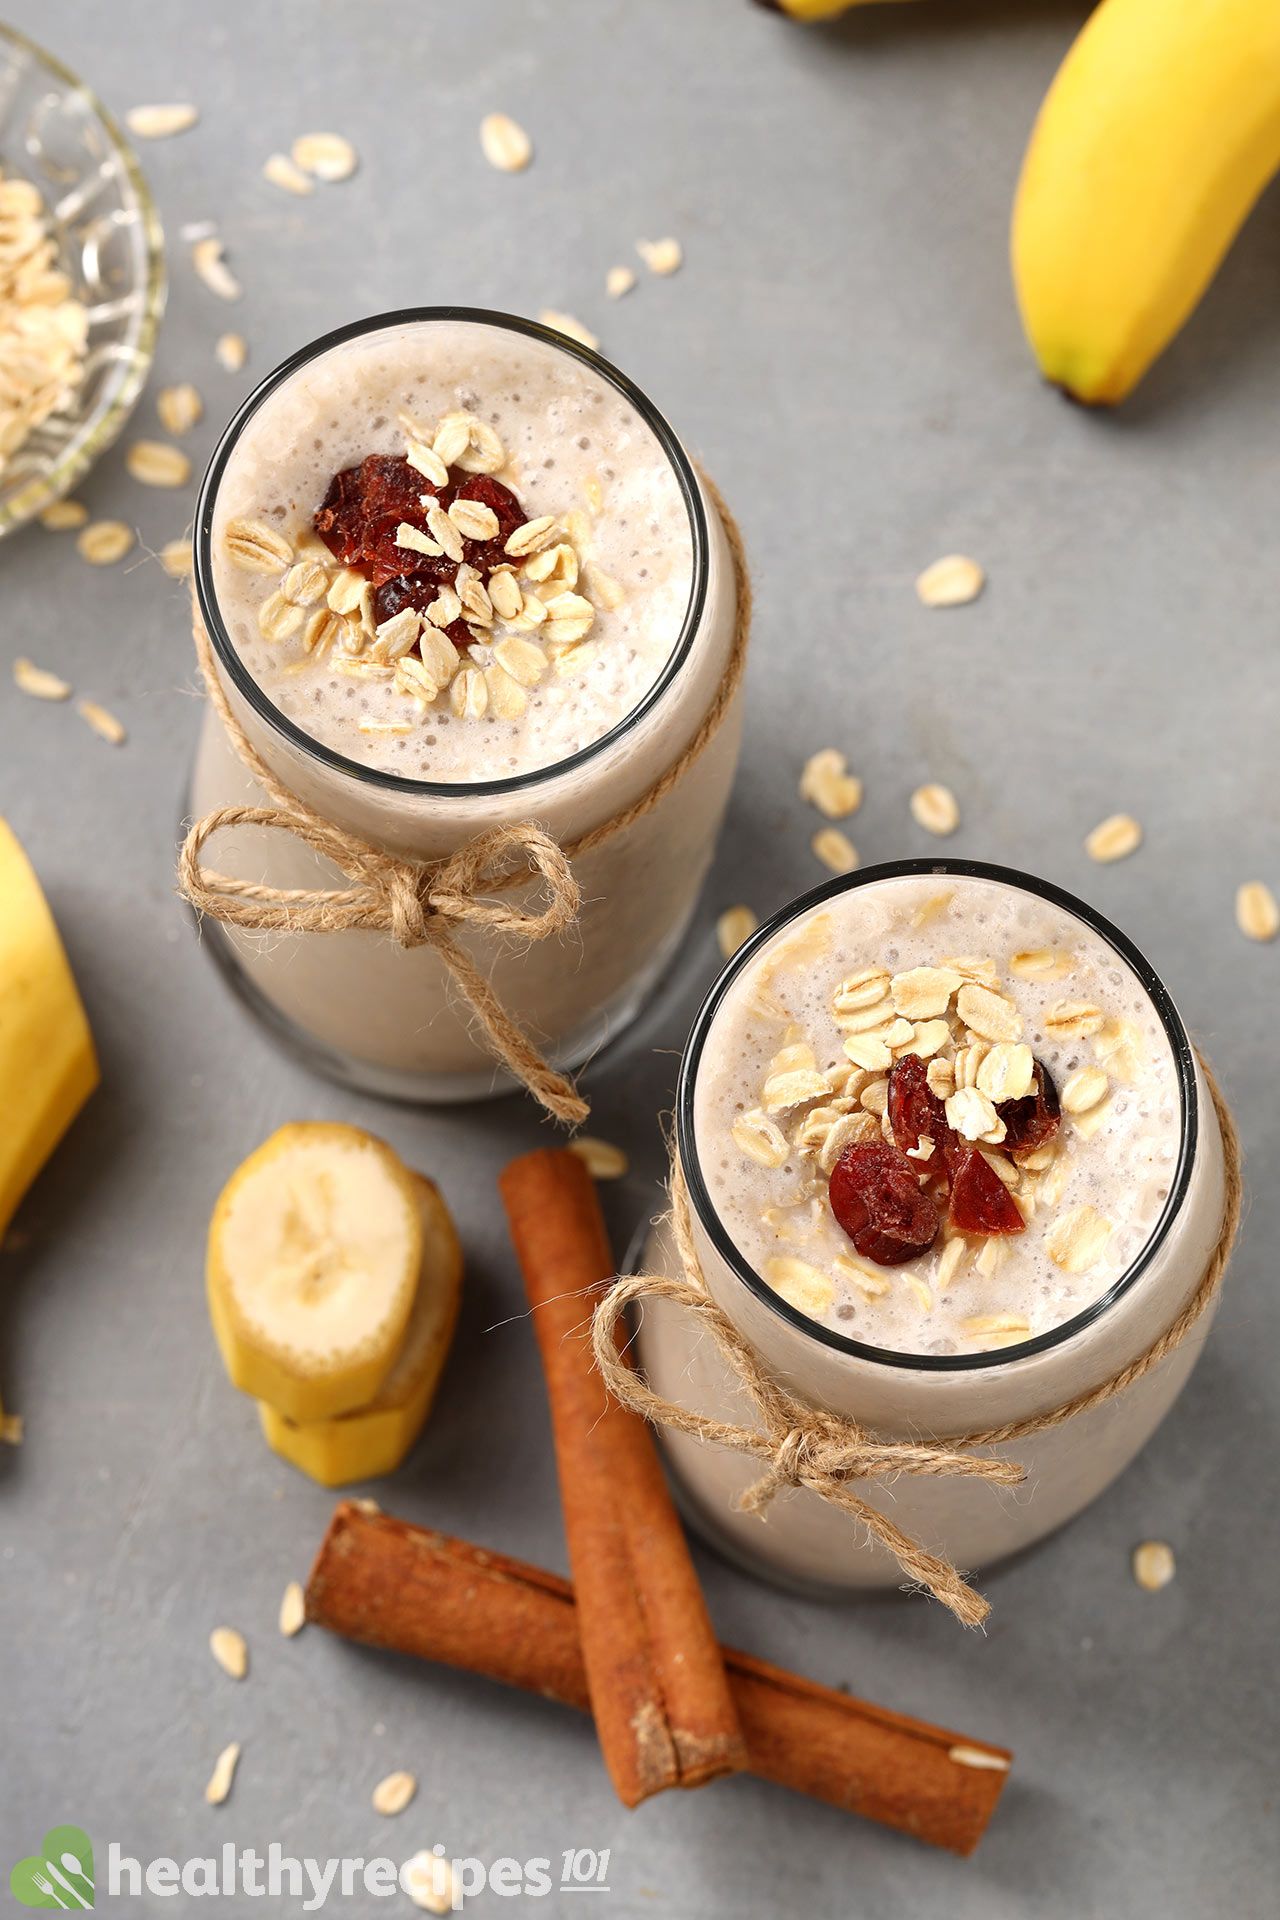 Is This Banana Oatmeal Smoothie Recipe Healthy